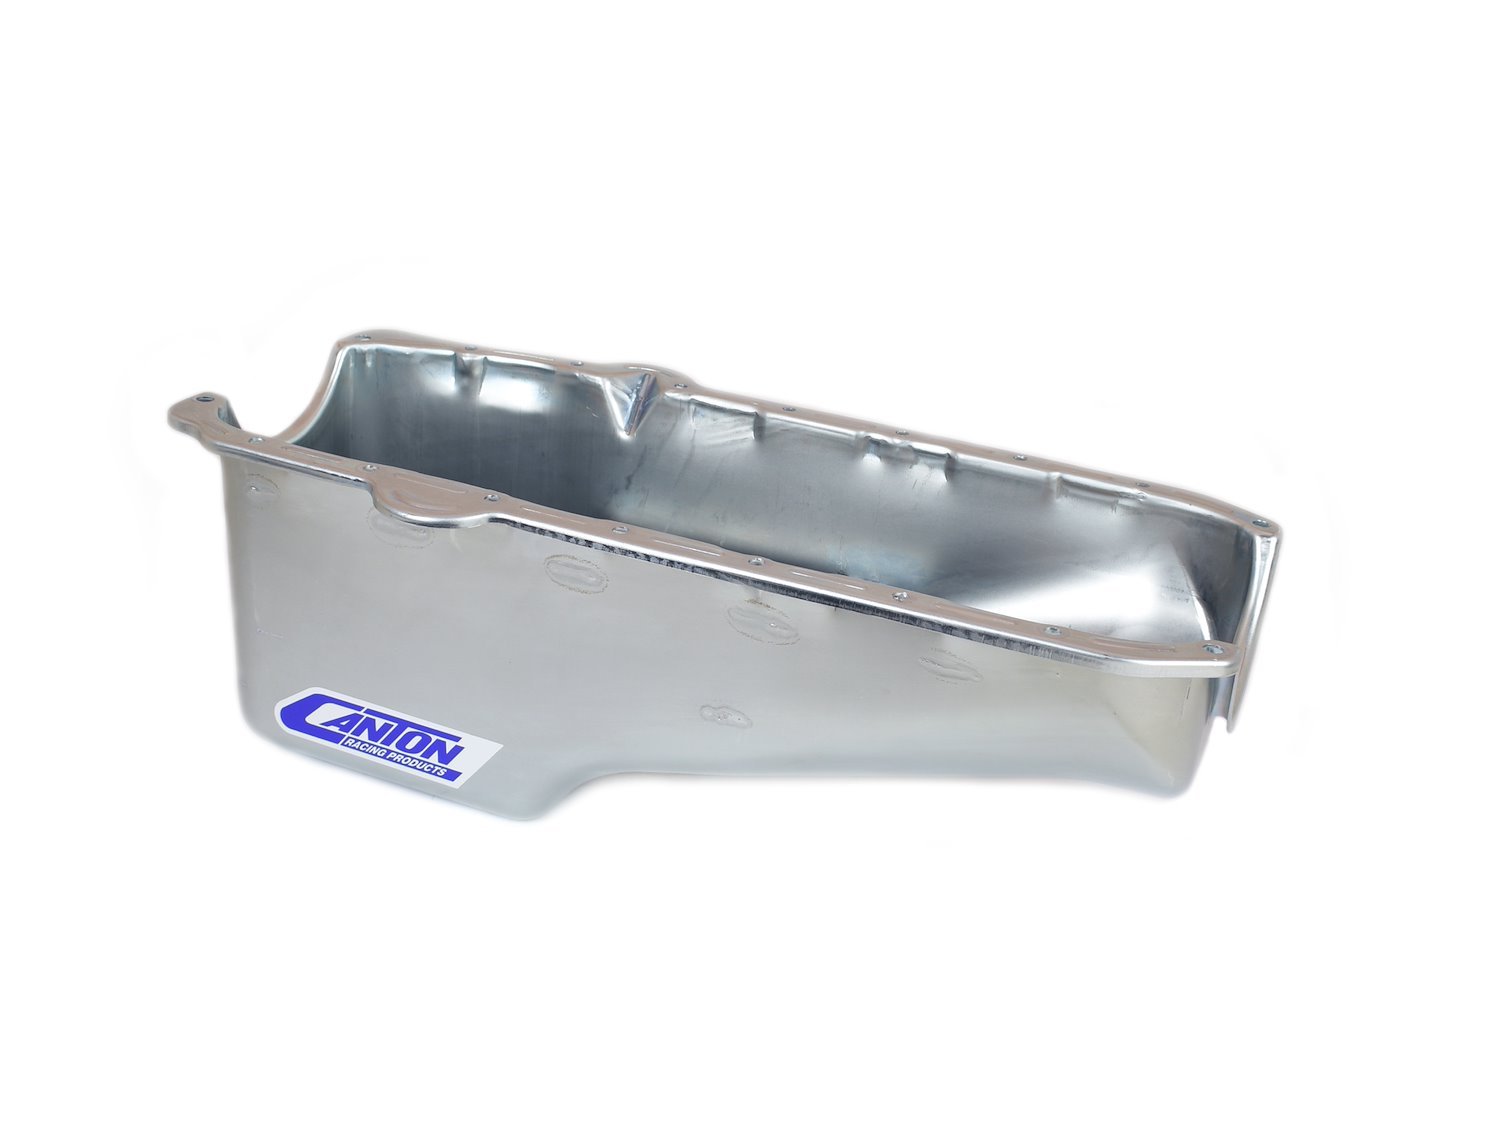 Stock Replacement Oil Pan Pre-1980 Small Block Chevy Blocks